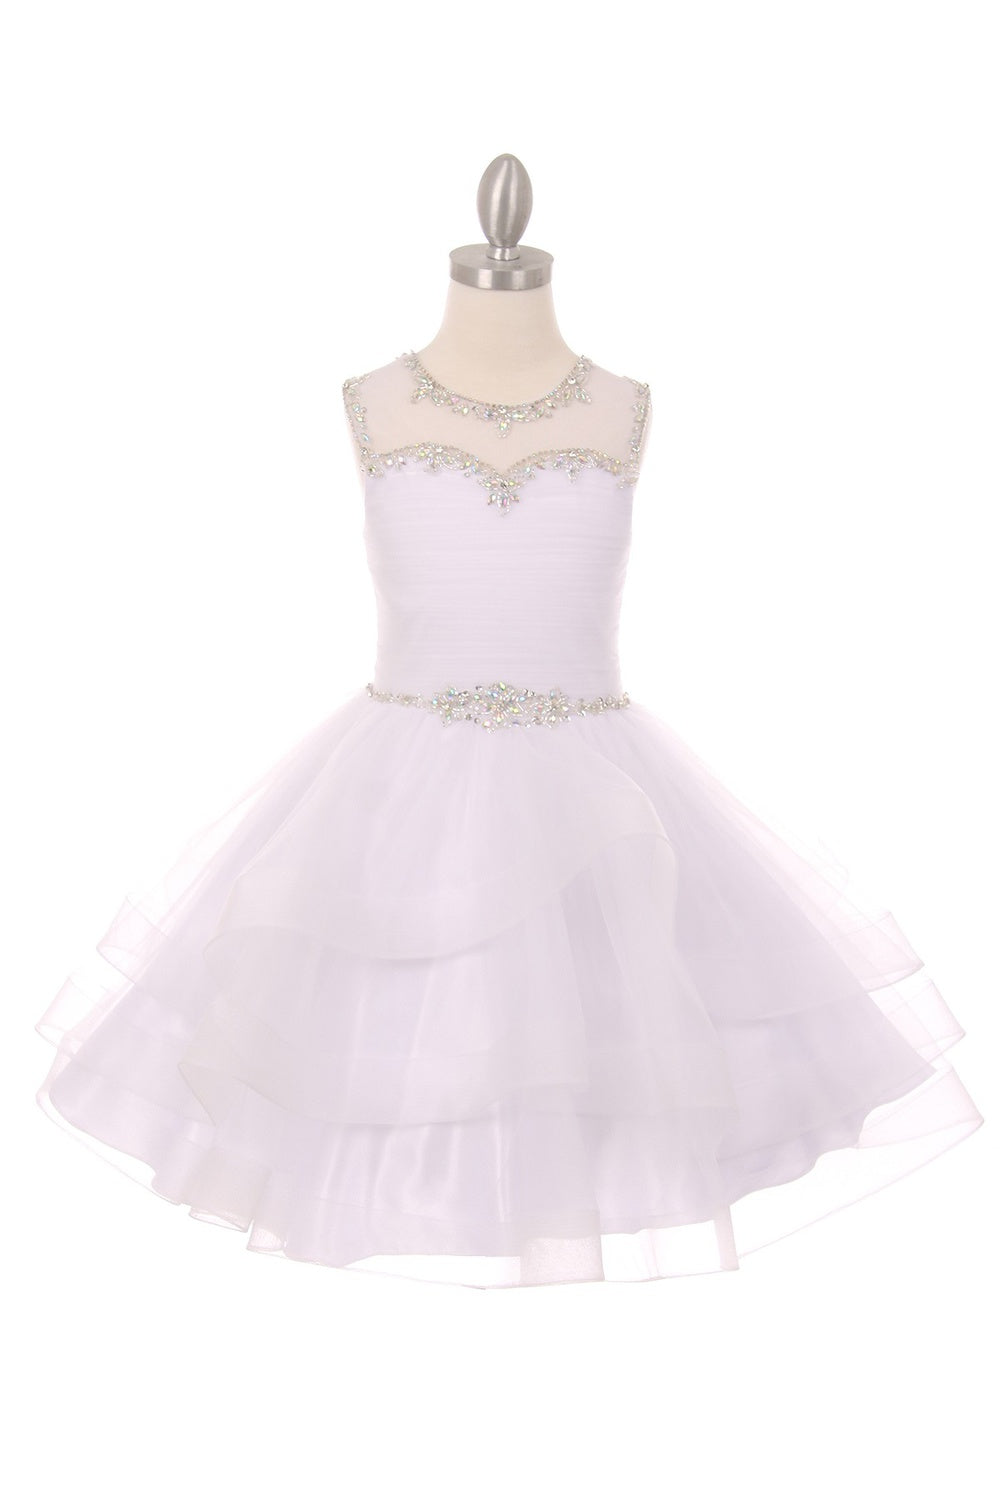 Gorgeous Sabrina Neckline Beaded Embellished Top With AB Stones Kids Dress CU5050 Elsy Style All Dresses